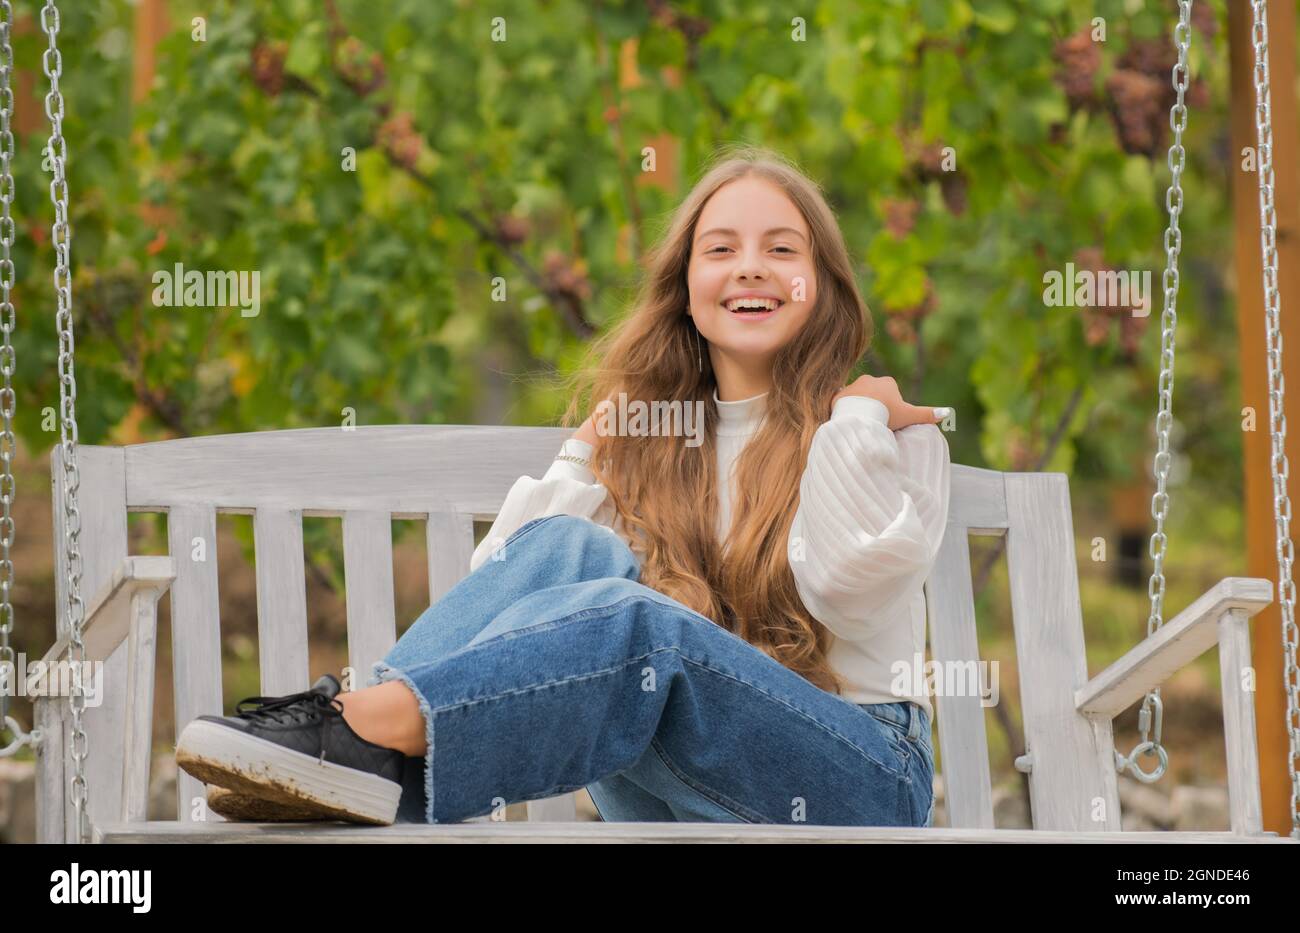 glad teen girl having free time outside on swing, playground Stock Photo